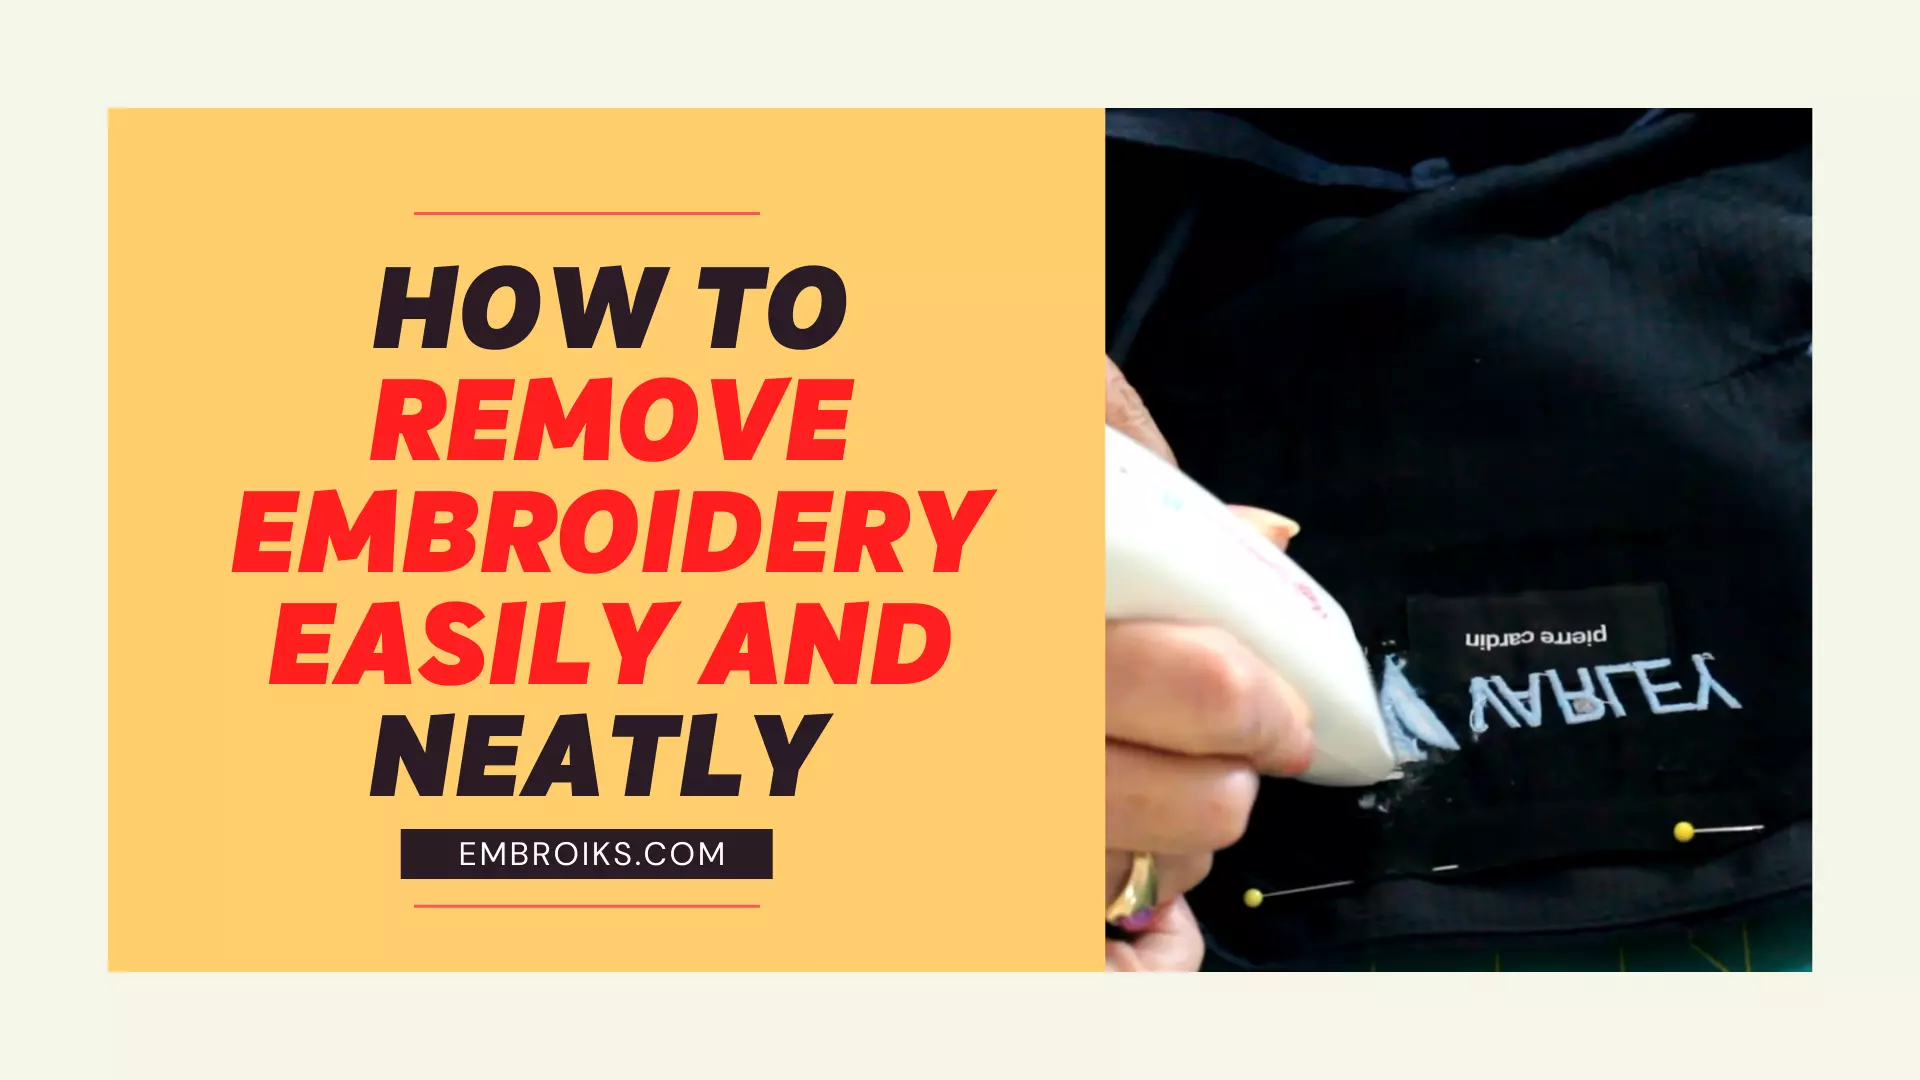 How to Remove Embroidery Easily and Neatly